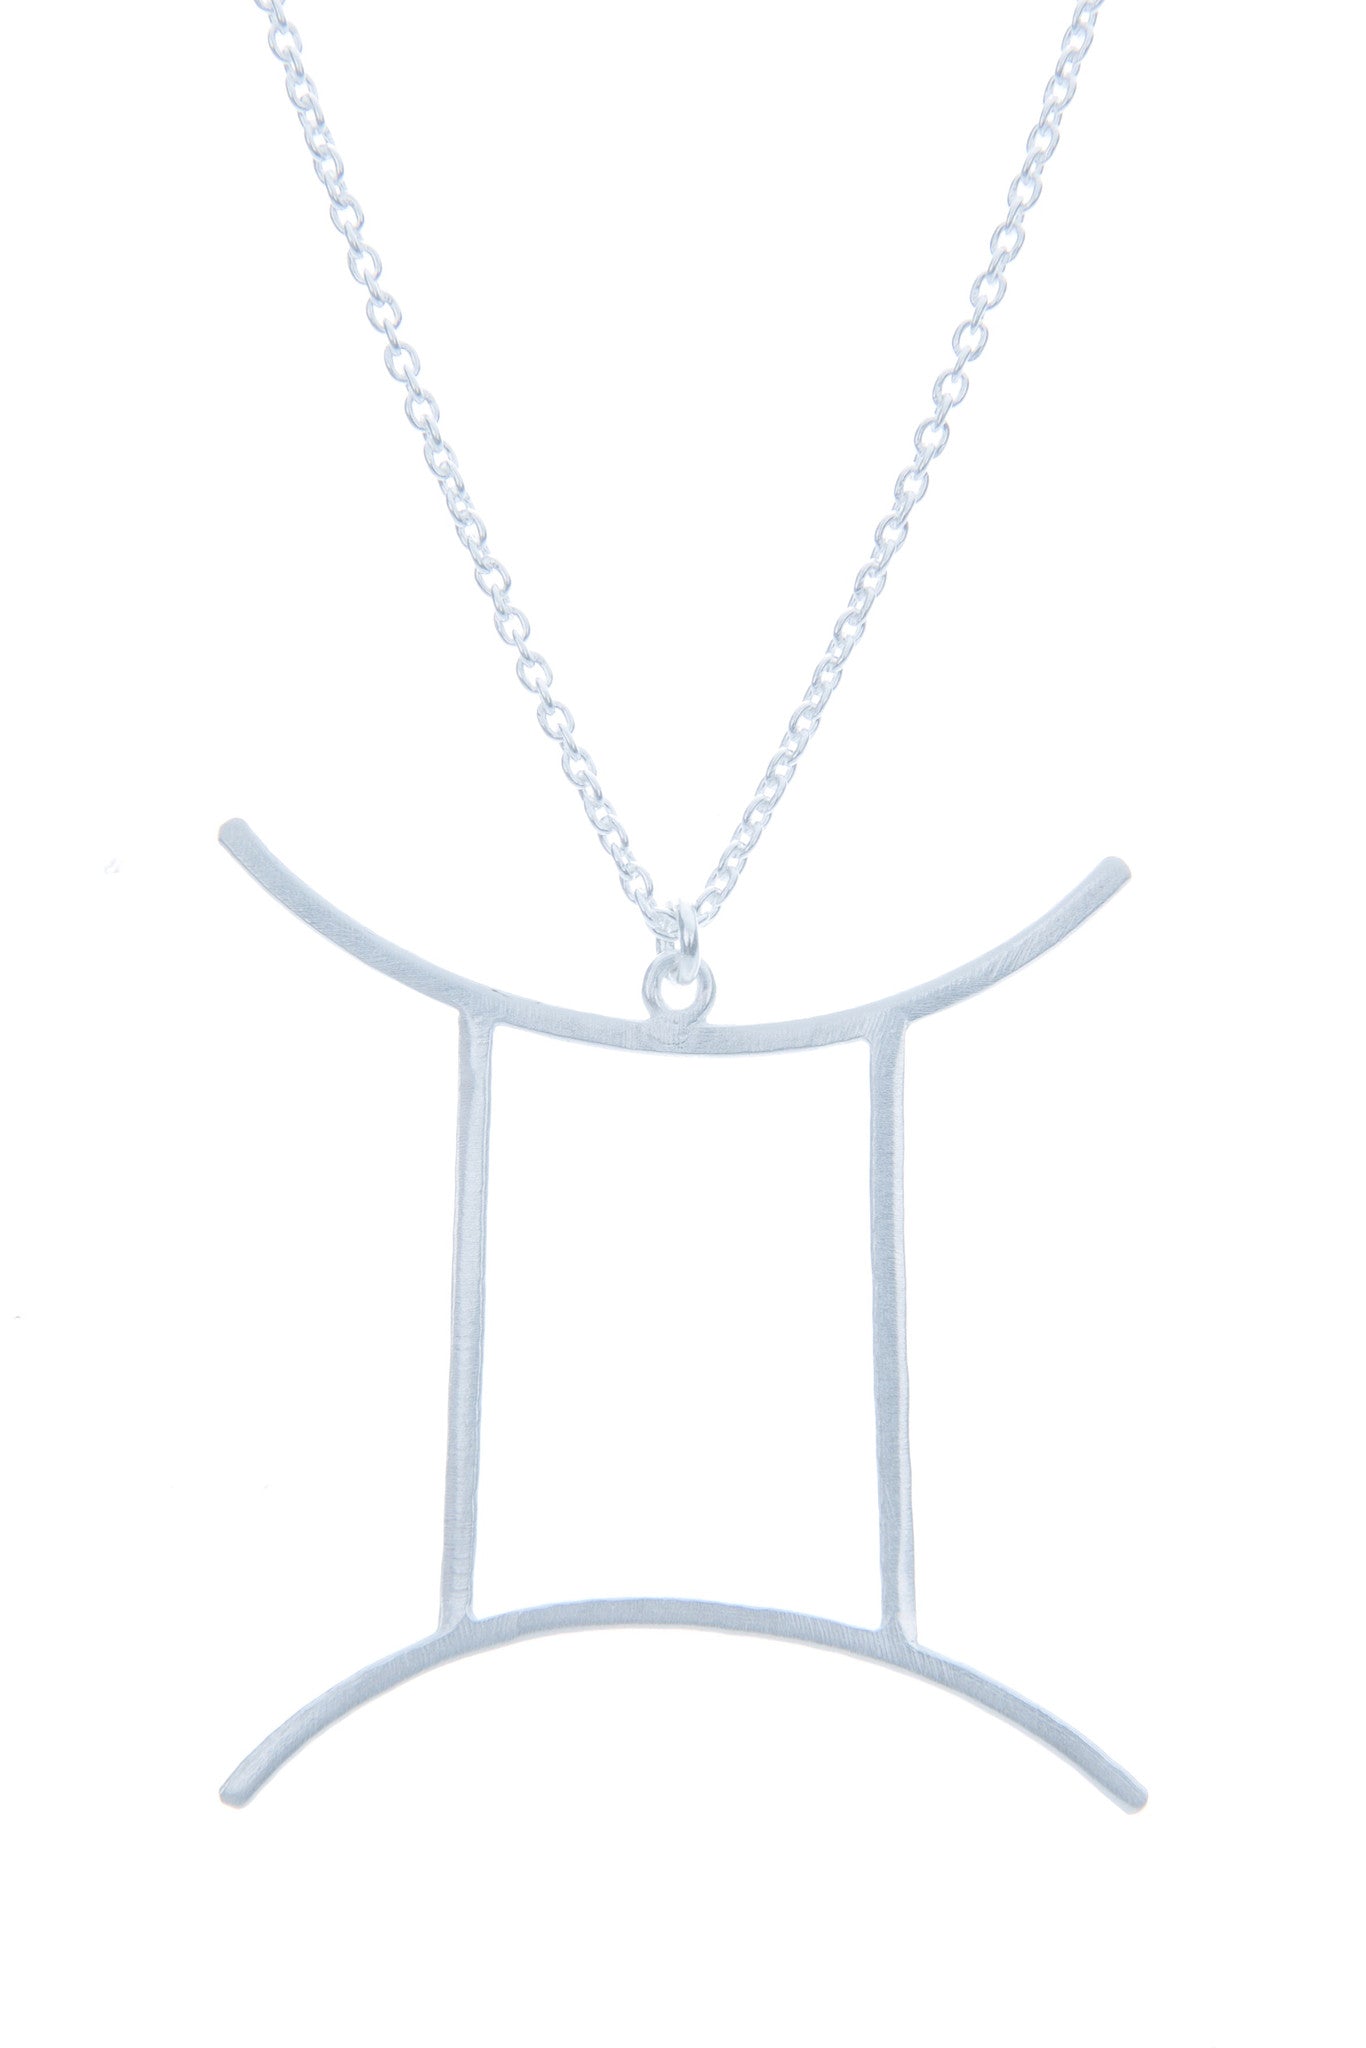 Handmade White Gold-Plated Necklaces